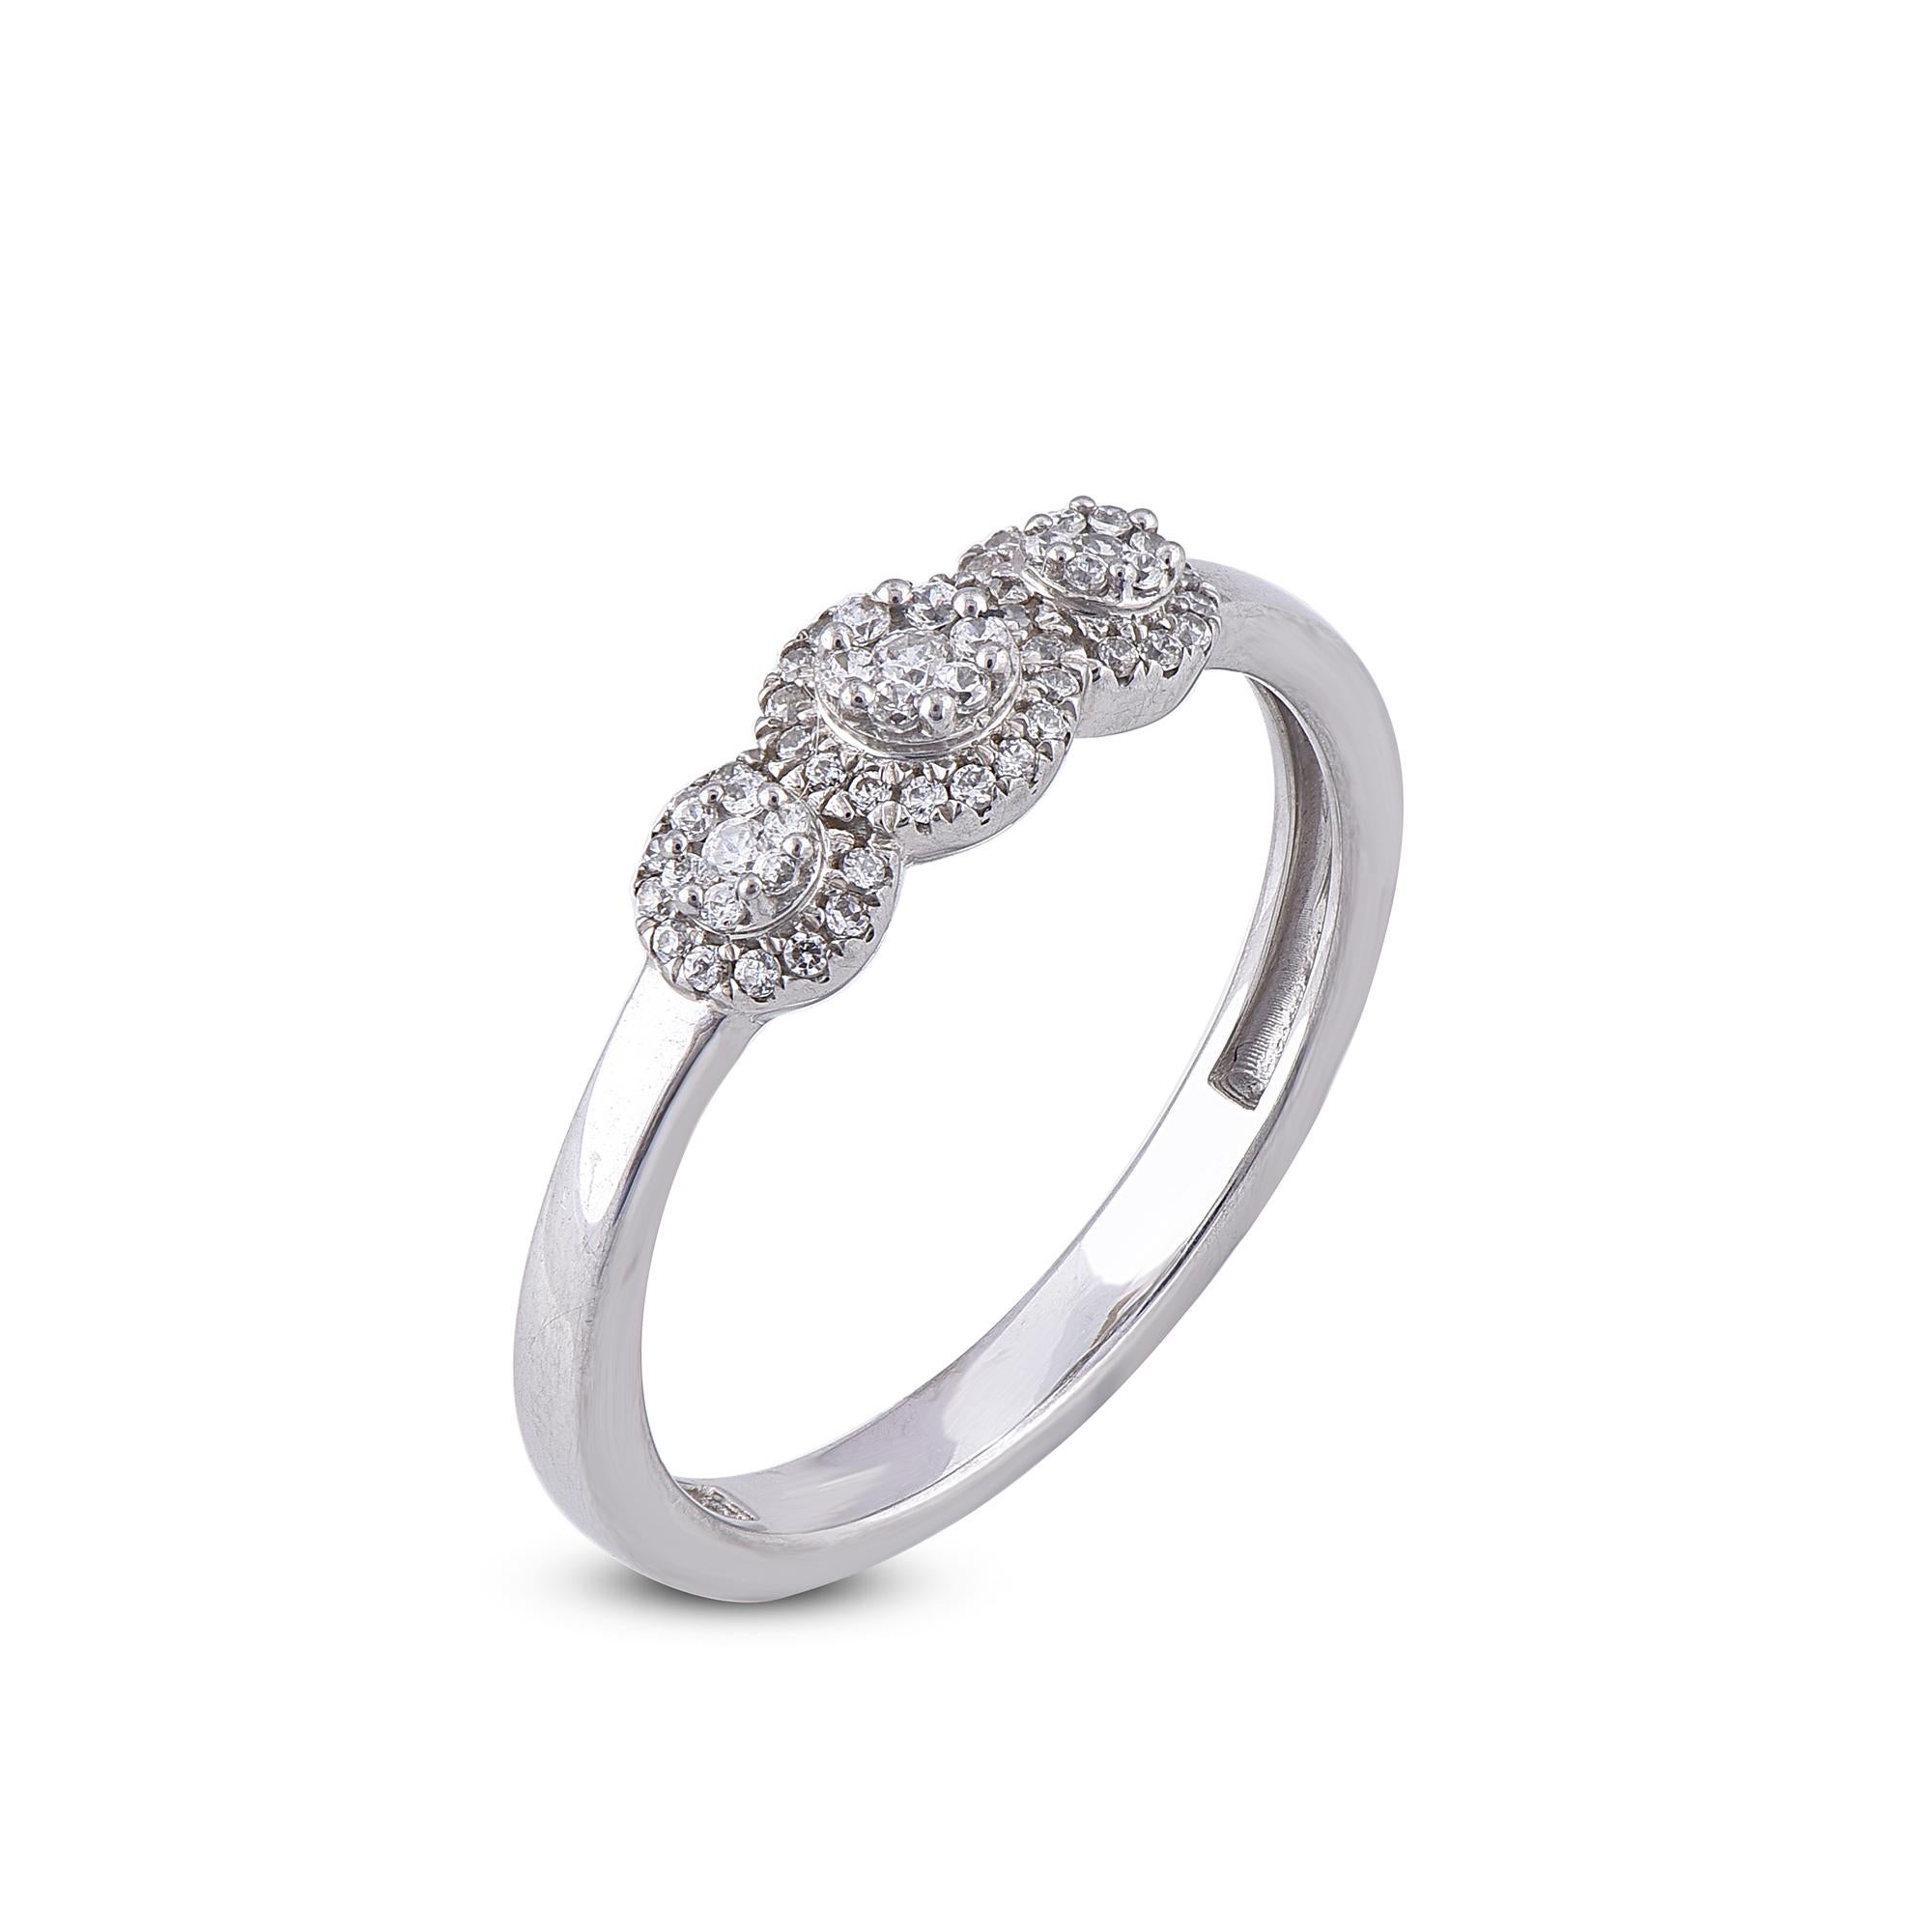 Make lifelong memory with this 3 cluster ring shimmers beautifully with 57 round natural diamonds with 0.20ct sets in prong and pressure setting. This cluster design ring fashioned in solid 14 karat white gold and H-I color I2 clarity
